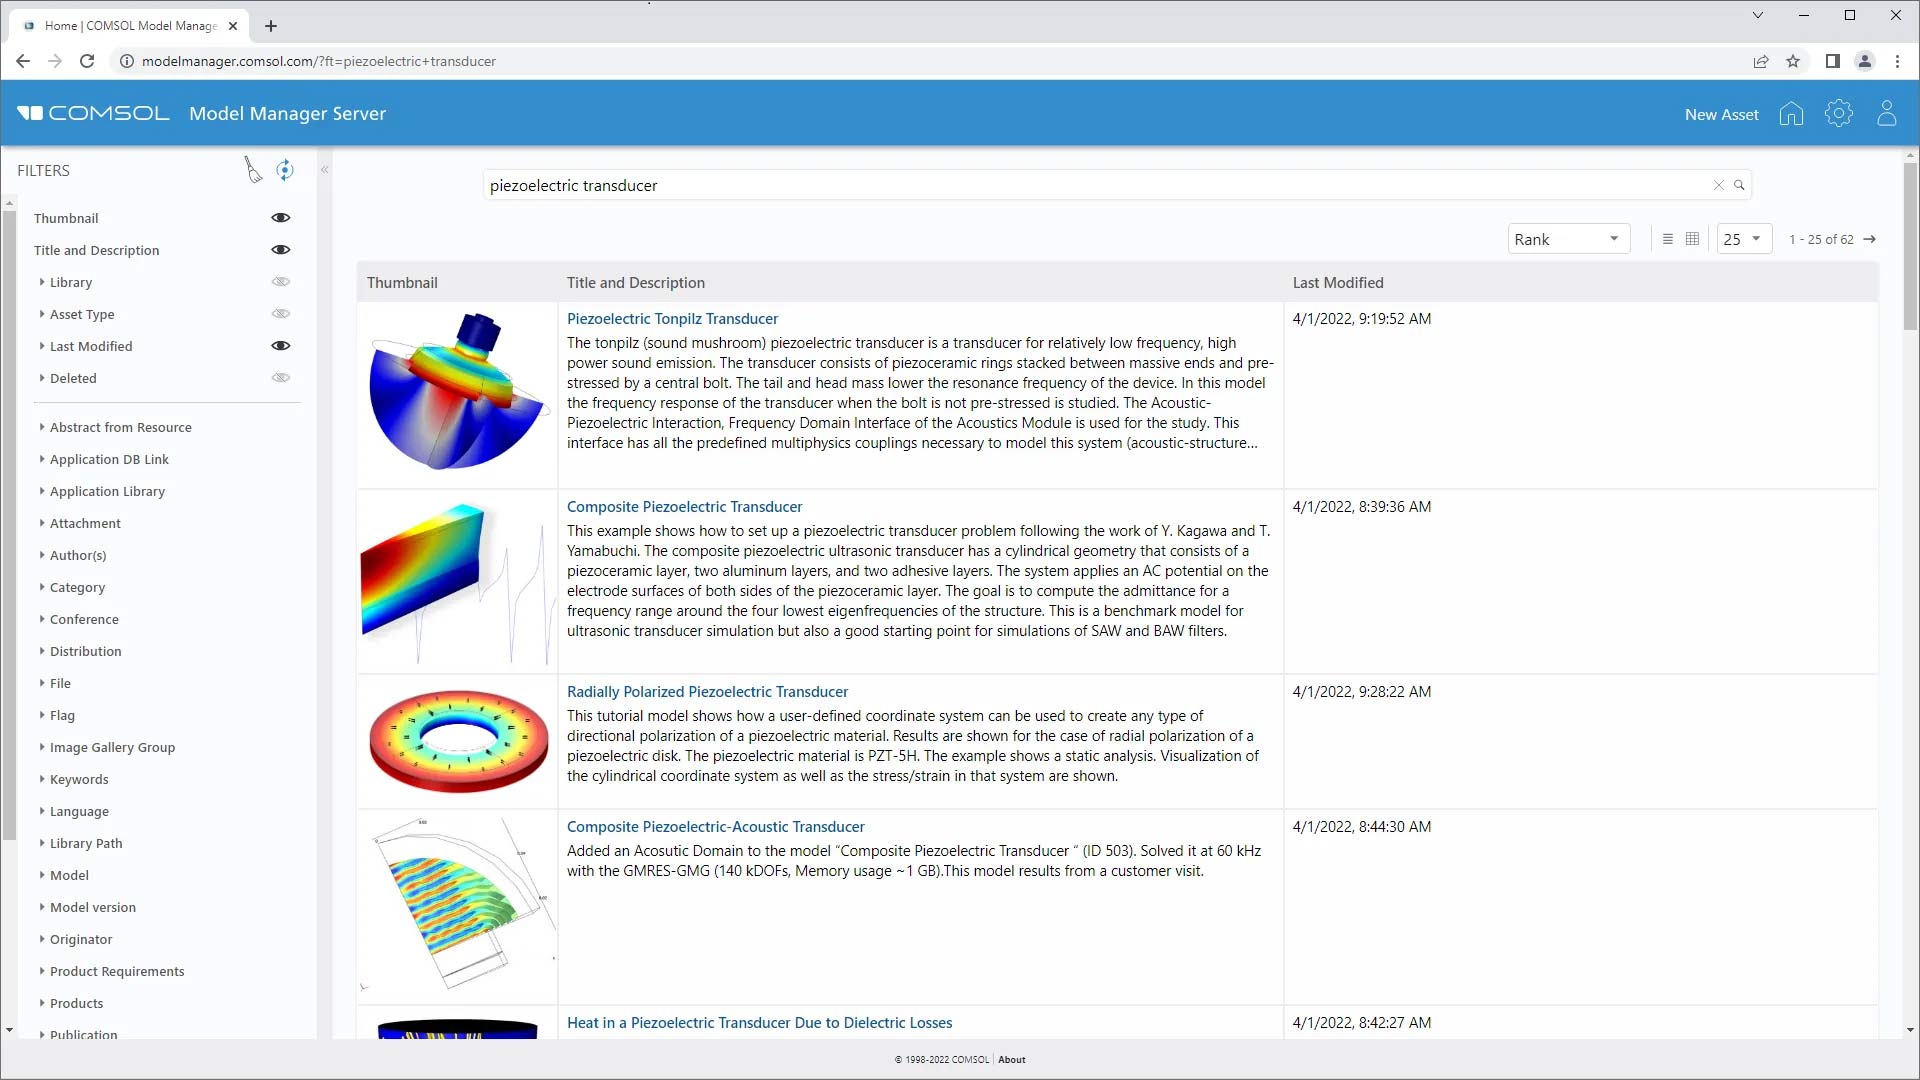 The Model Manager server asset management system opened in a web browser.